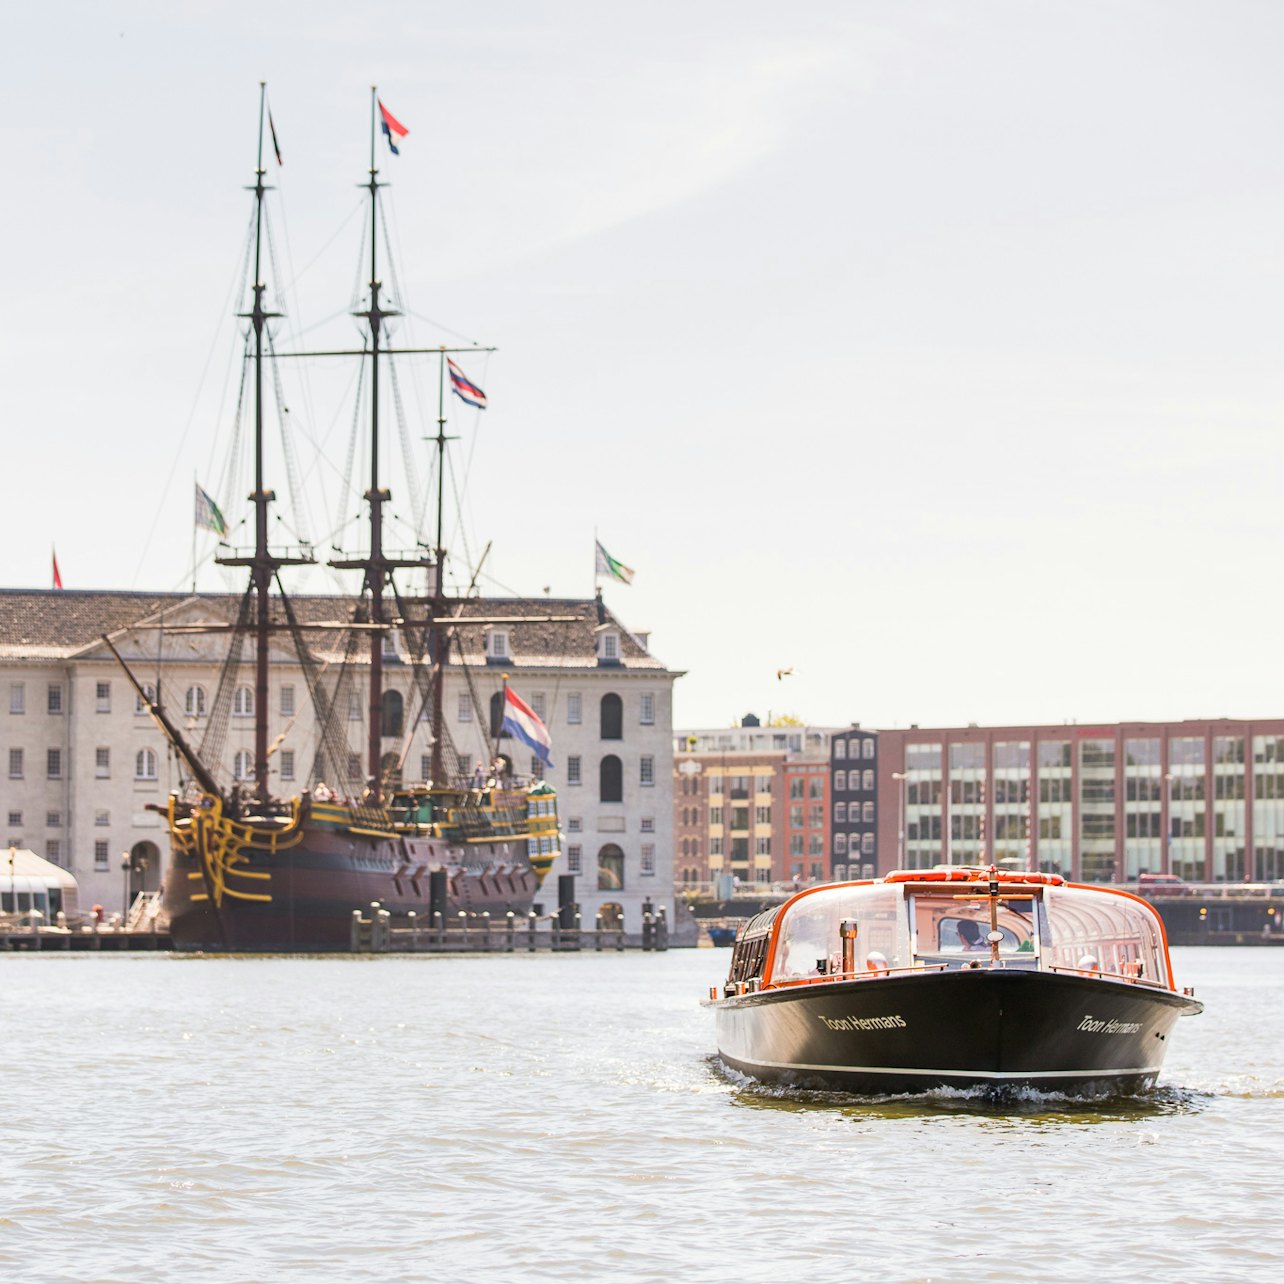 Amsterdam: Lovers Canal Cruise from Central Station - Accommodations in Ámsterdam